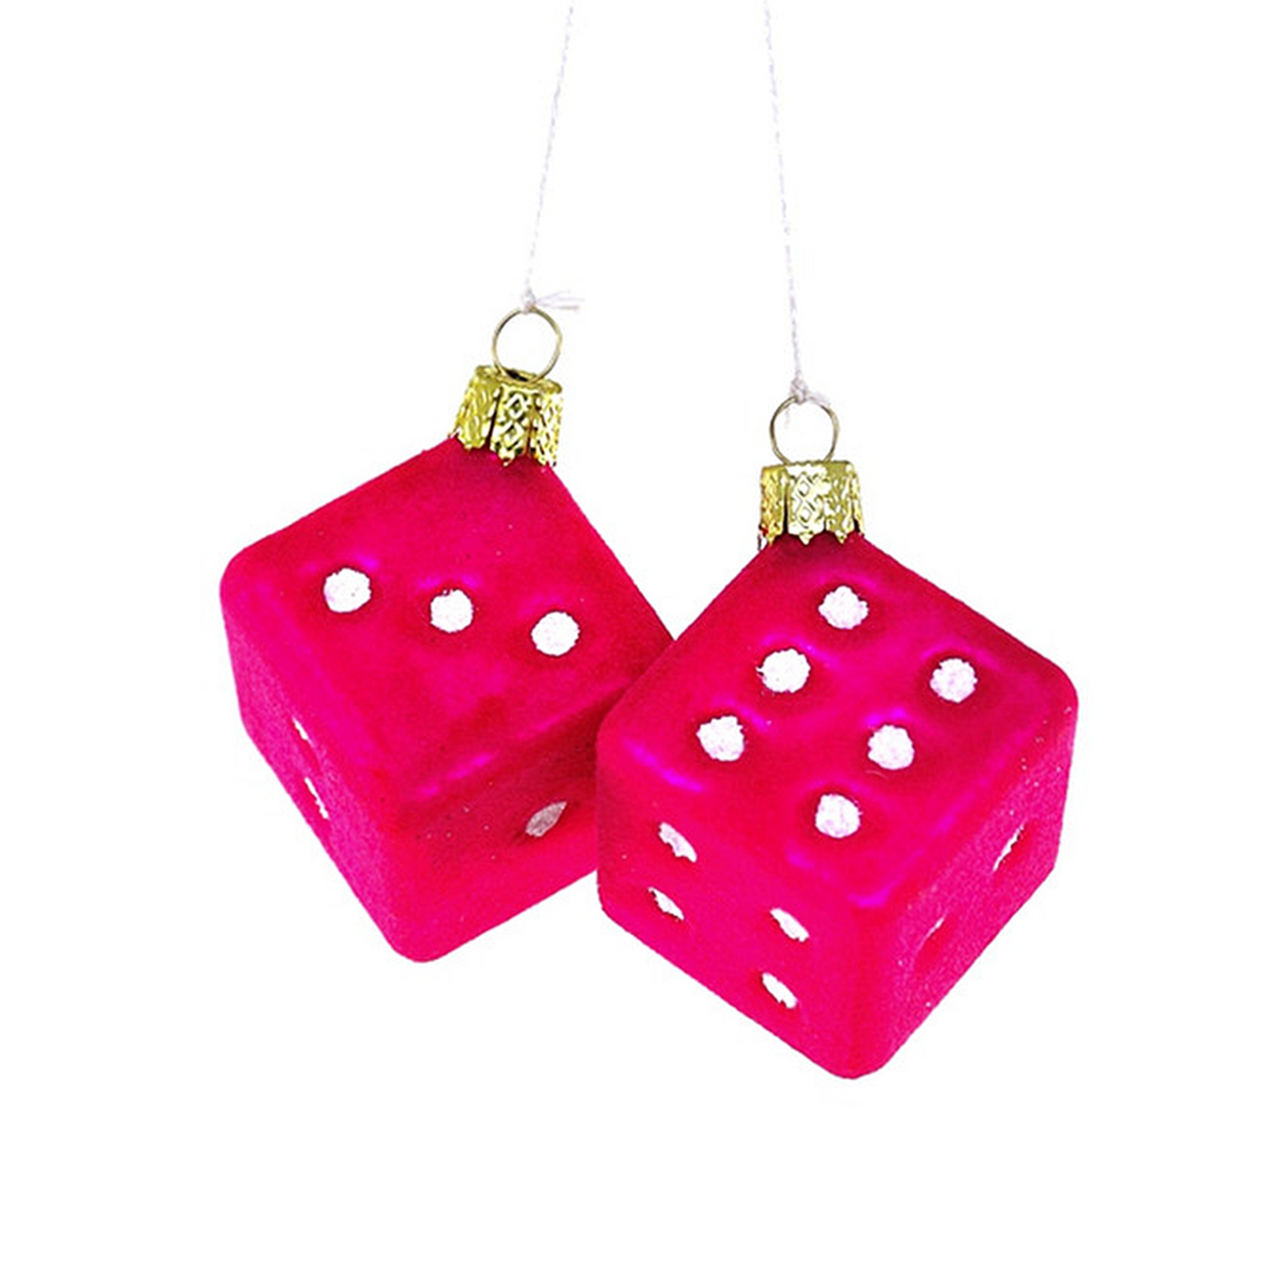 FUZZY PINK DICE GLASS ORNAMENT